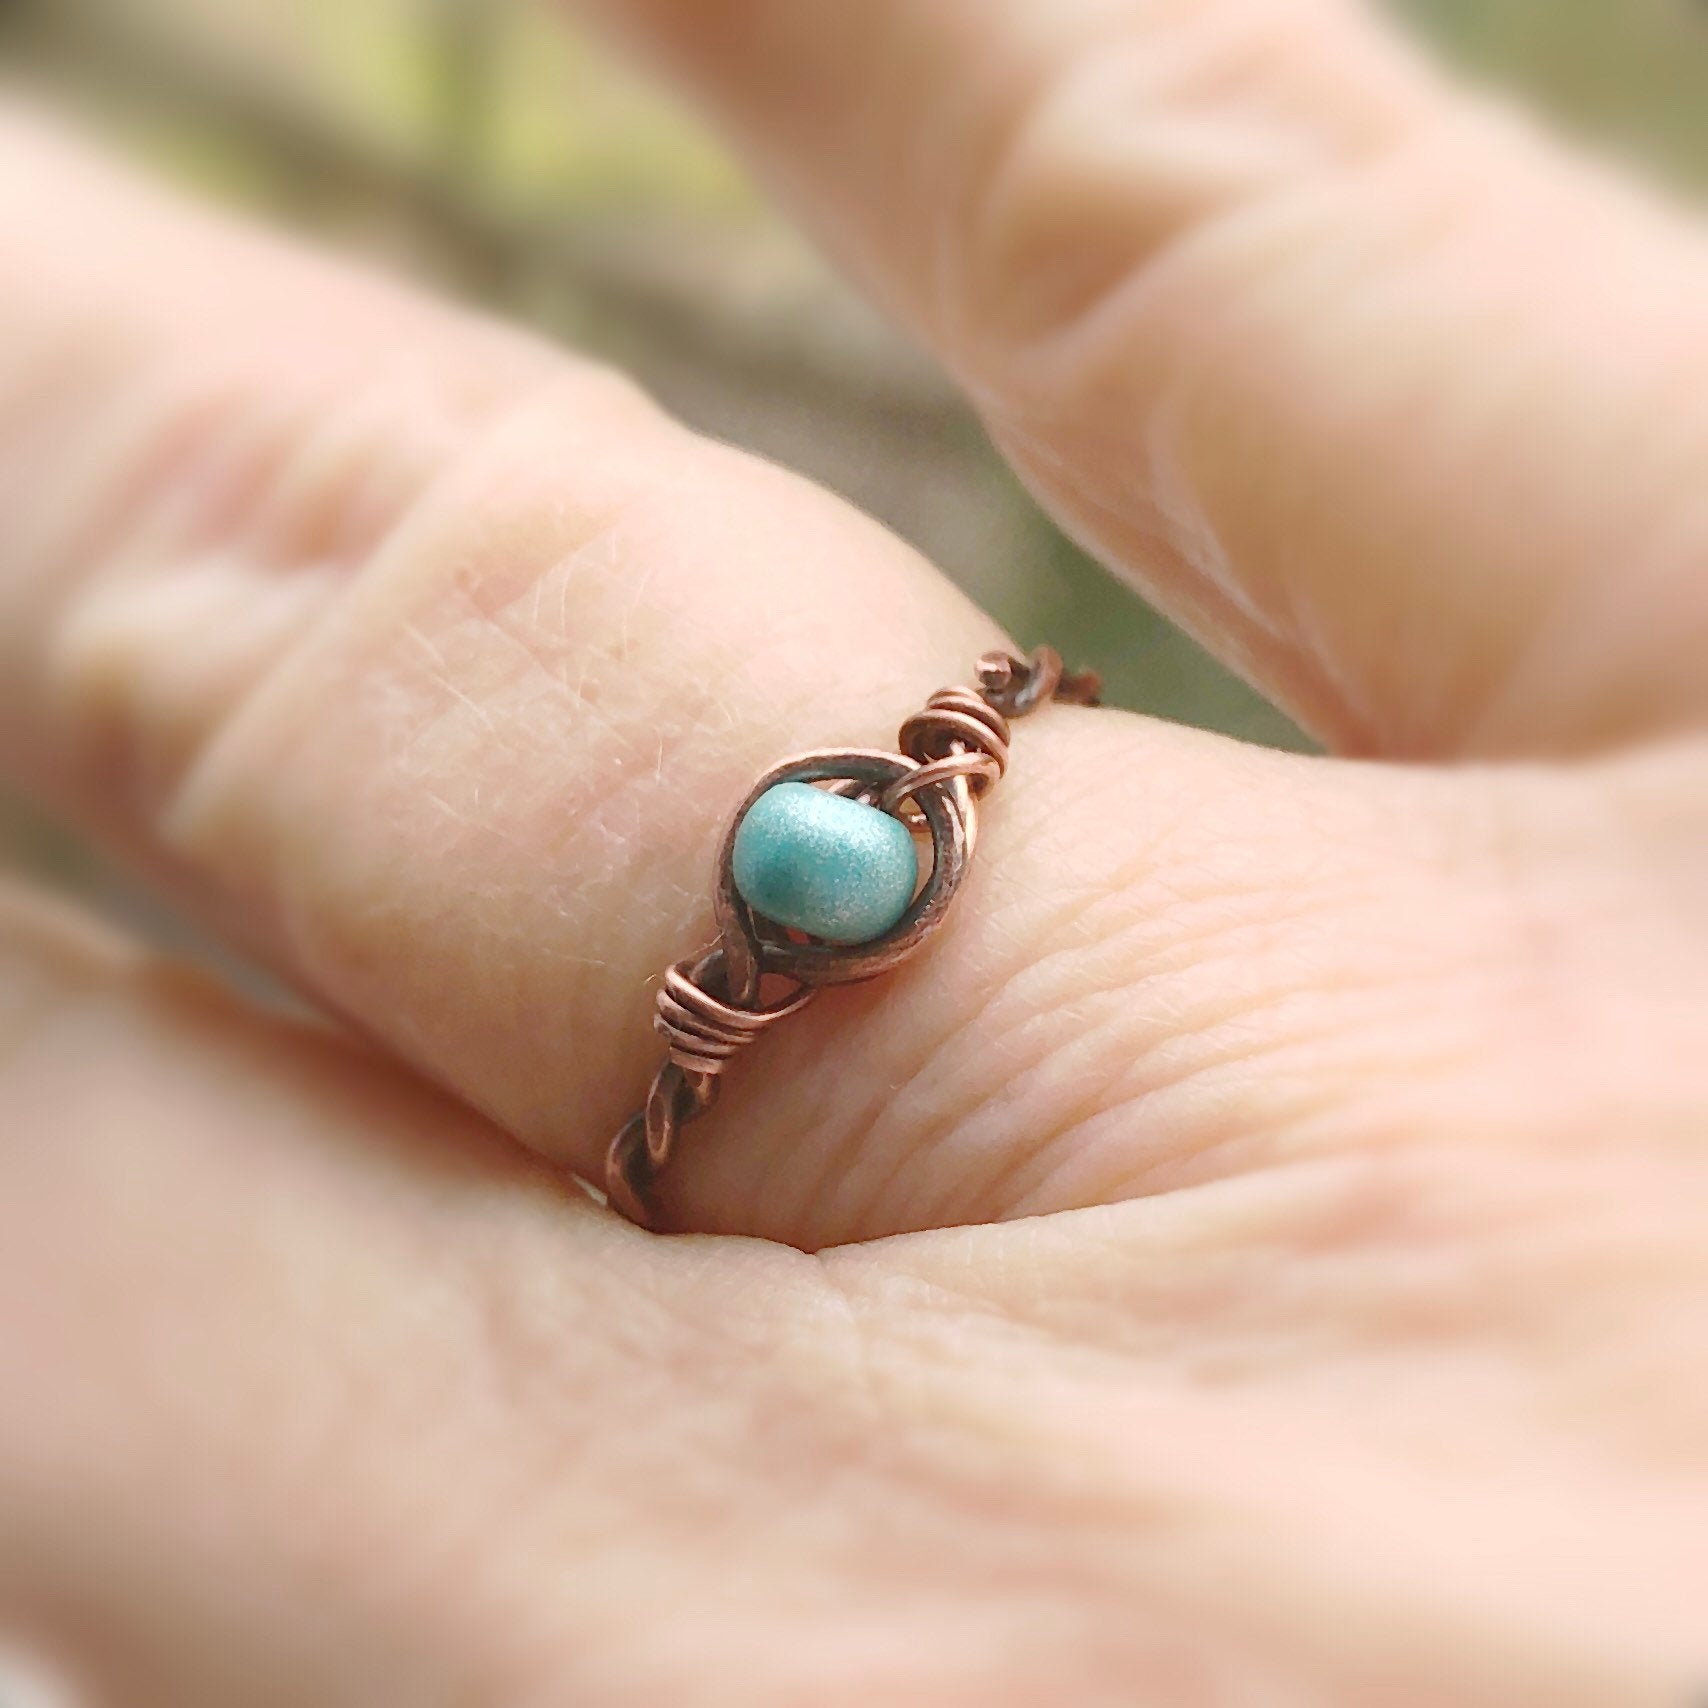 Personalized rose gold copper & turquoise birthstone jewelry for bijoux minimaliste braided ring style, Dainty copper hammered stacking ring